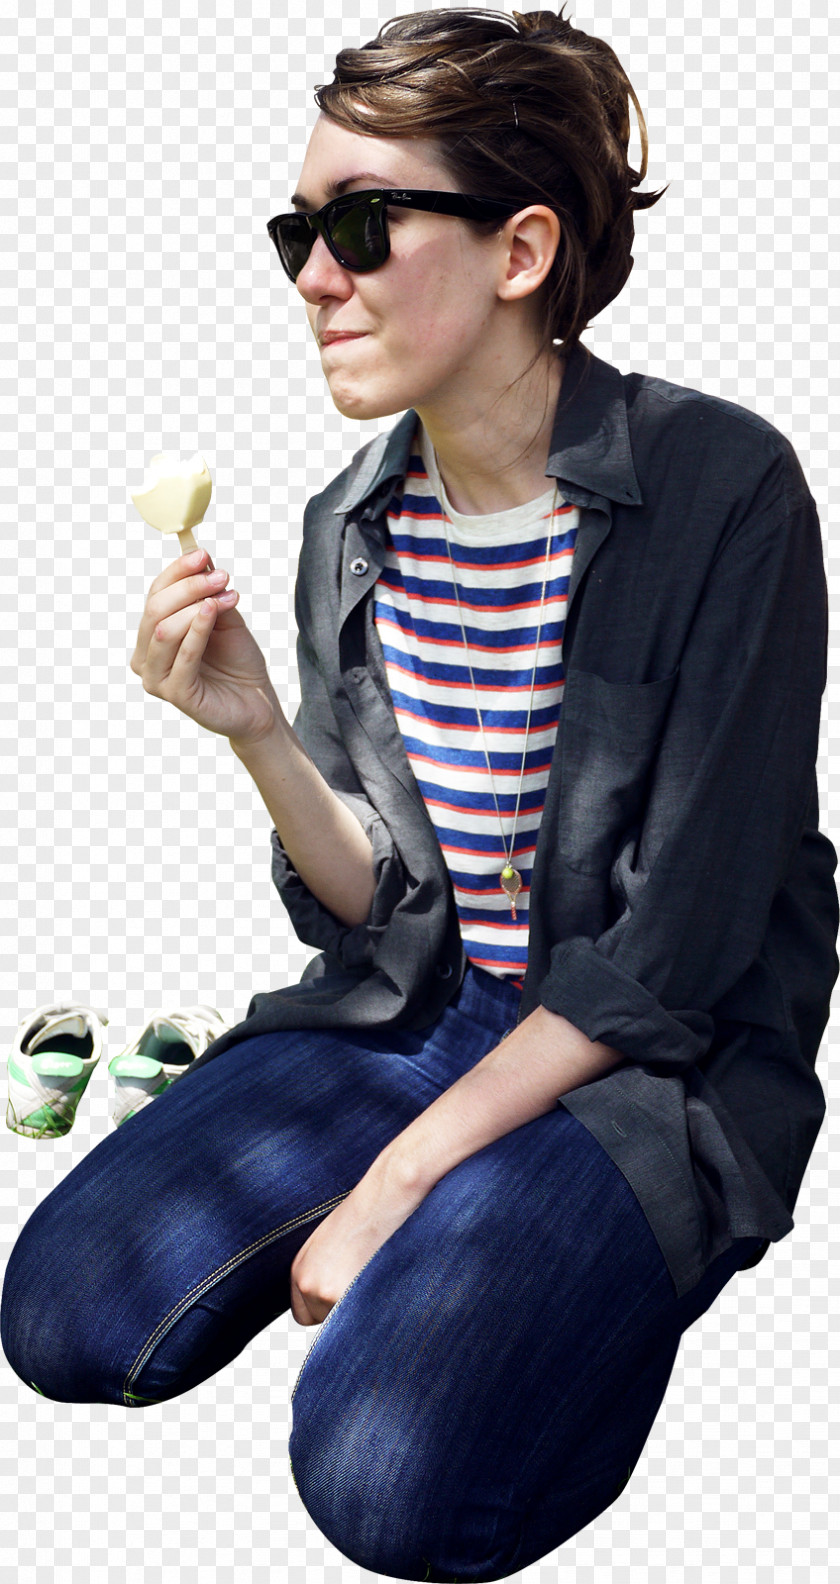 Eating Ice Cream Sitting PNG